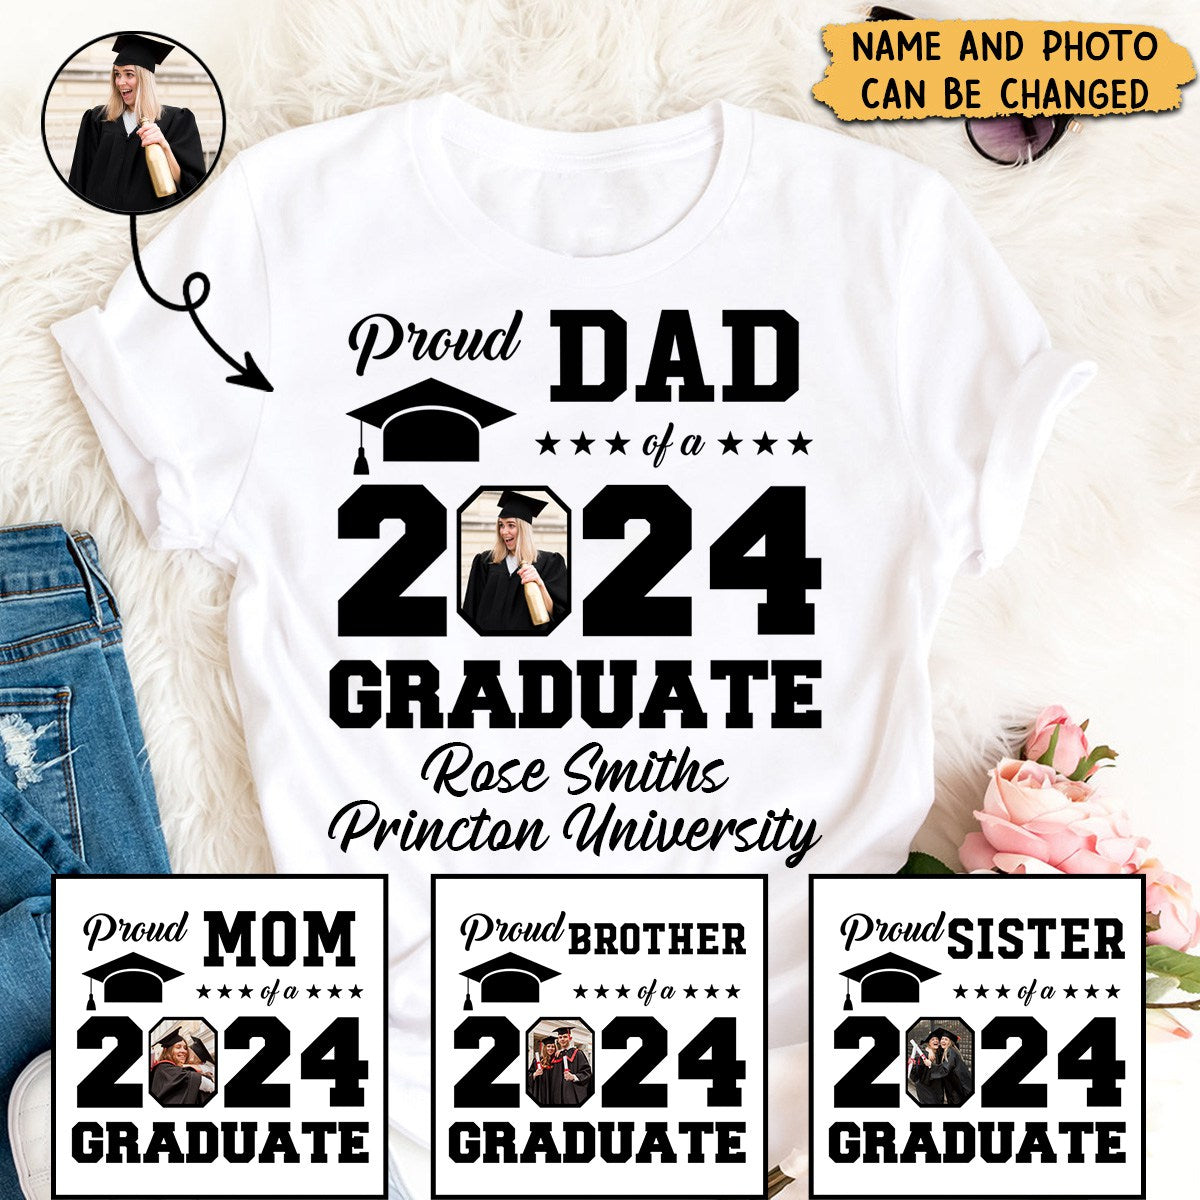 Proud Mom Of A Graduate - Personalized Photo T-Shirt